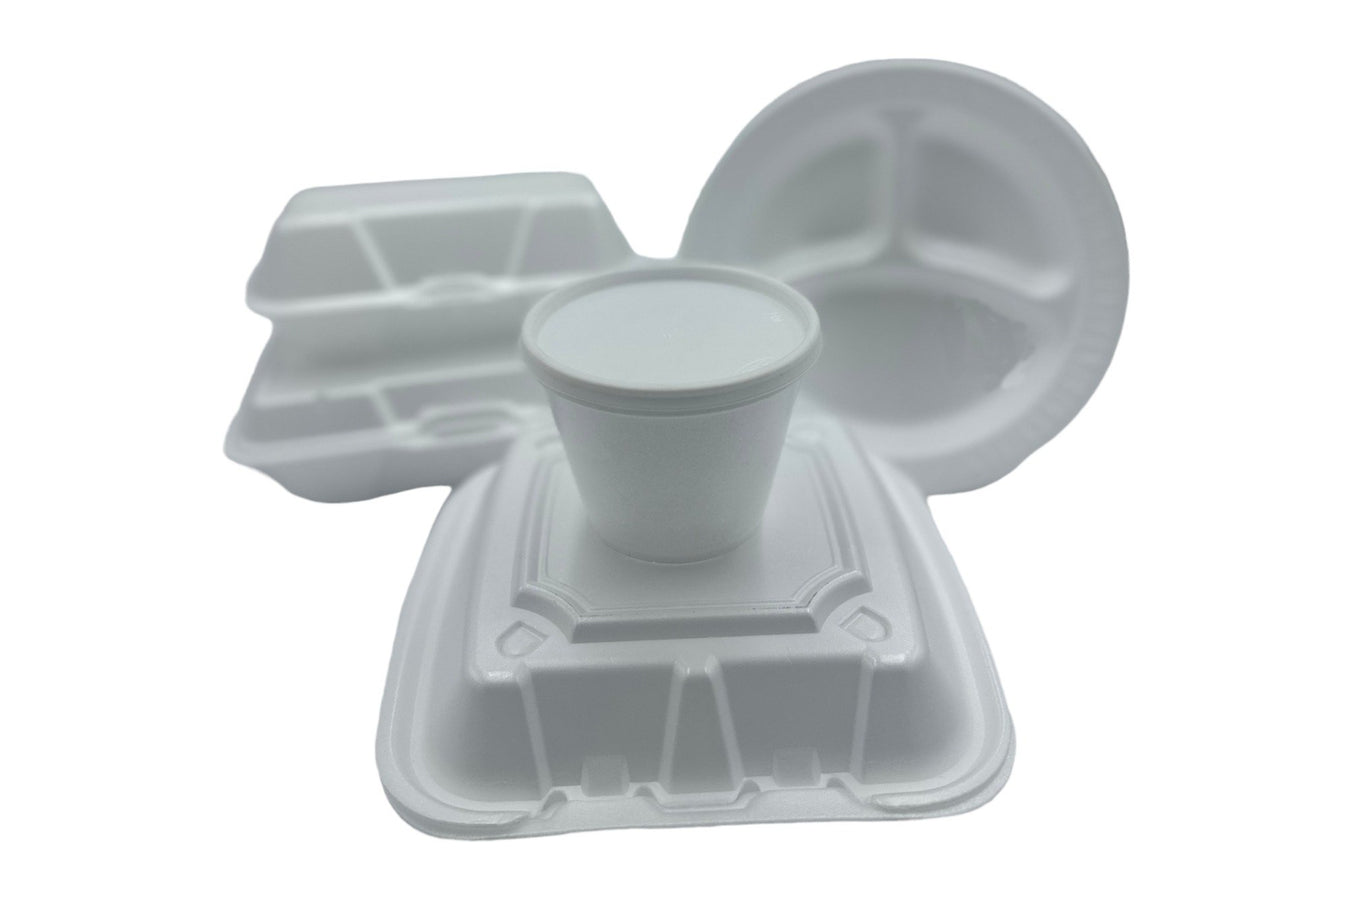 Foam-Containers, Cups, & Plates